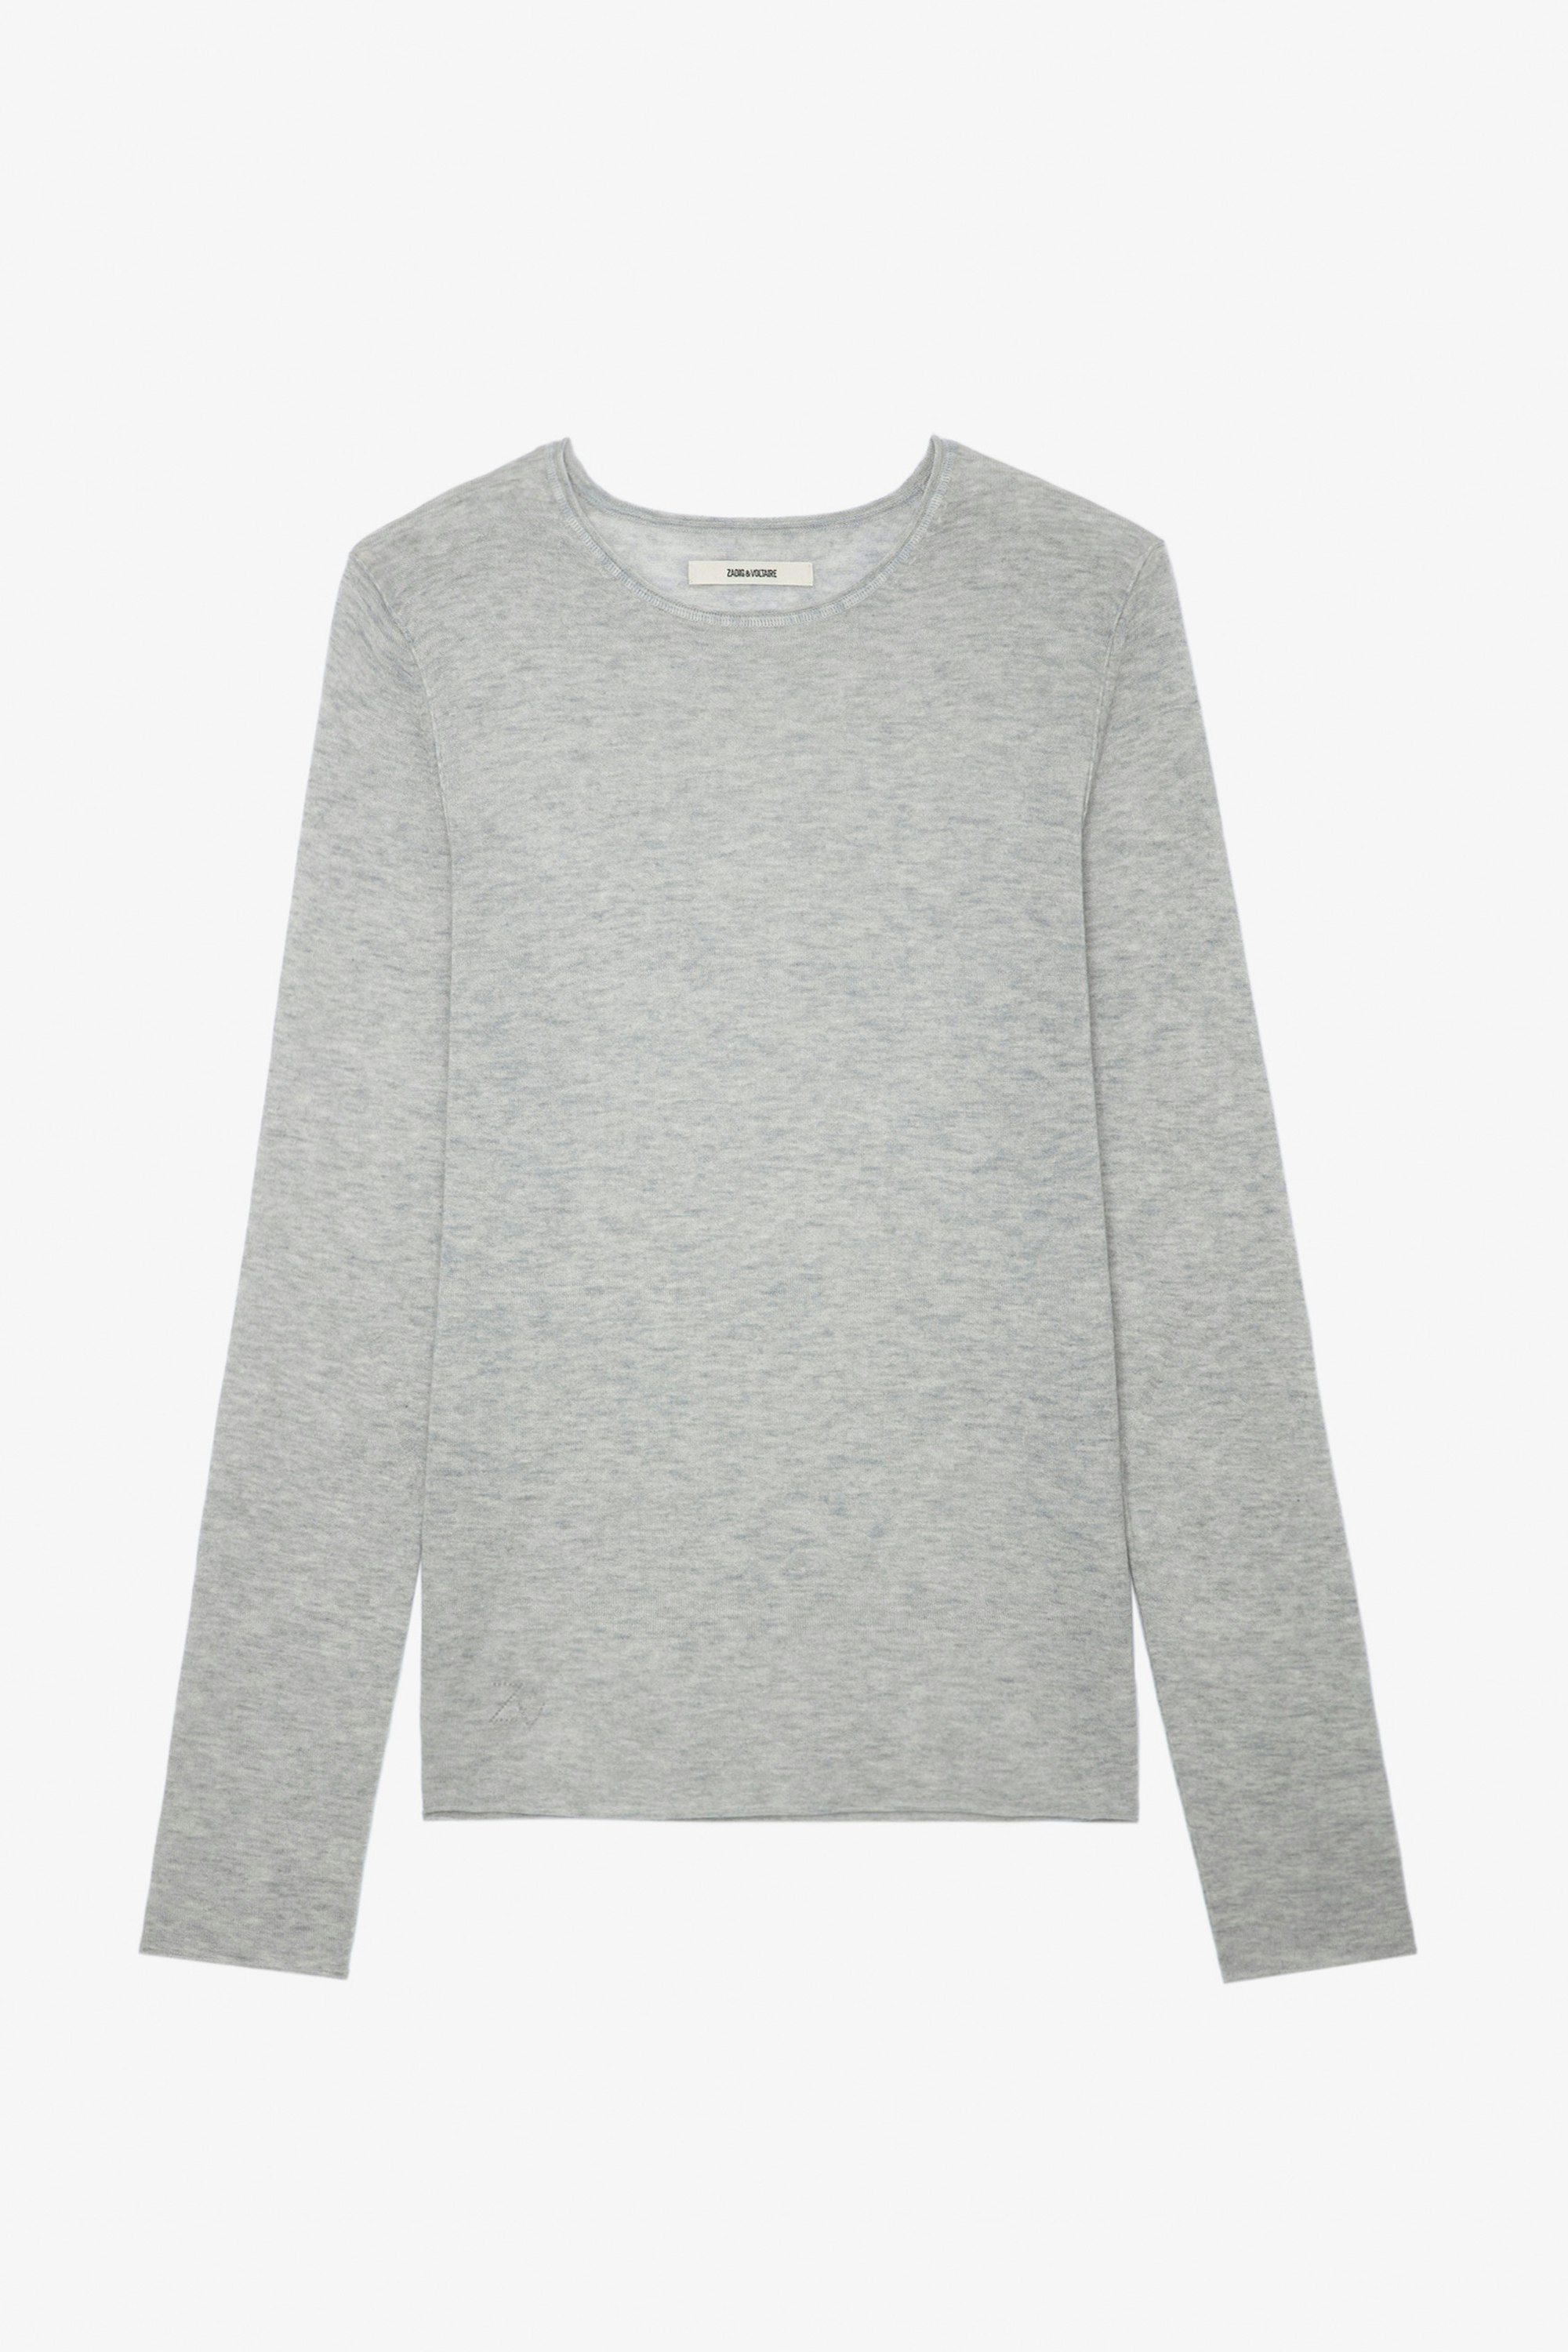 Teiss Cashmere Jumper - Men’s grey feather cashmere sweater.